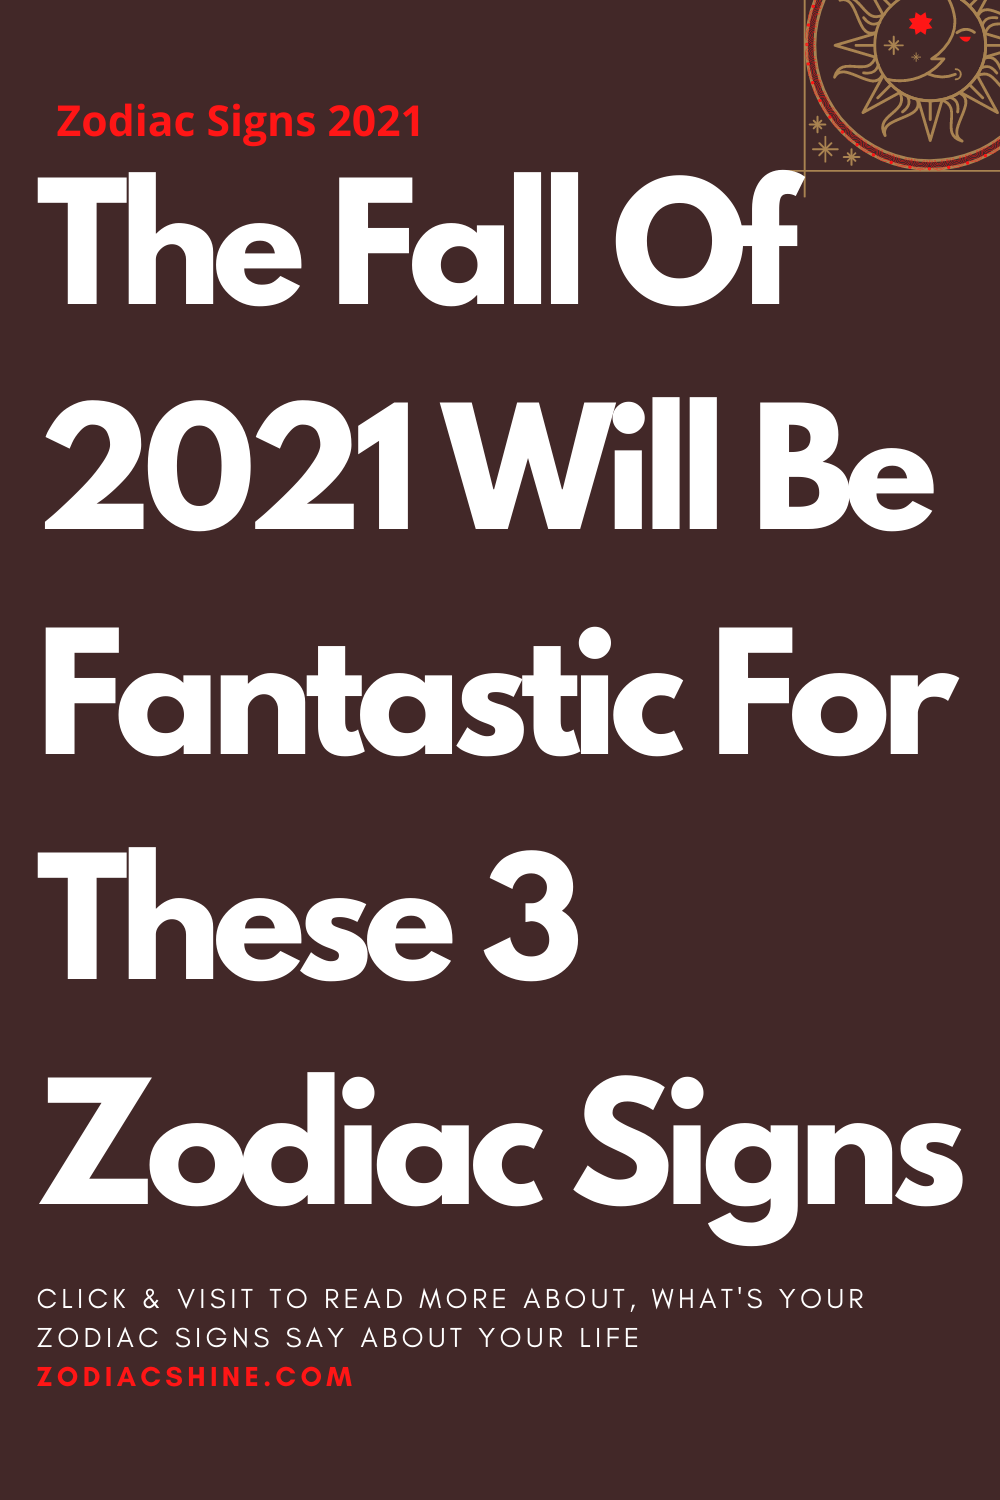 The Fall Of 2021 Will Be Fantastic For These 3 Zodiac Signs